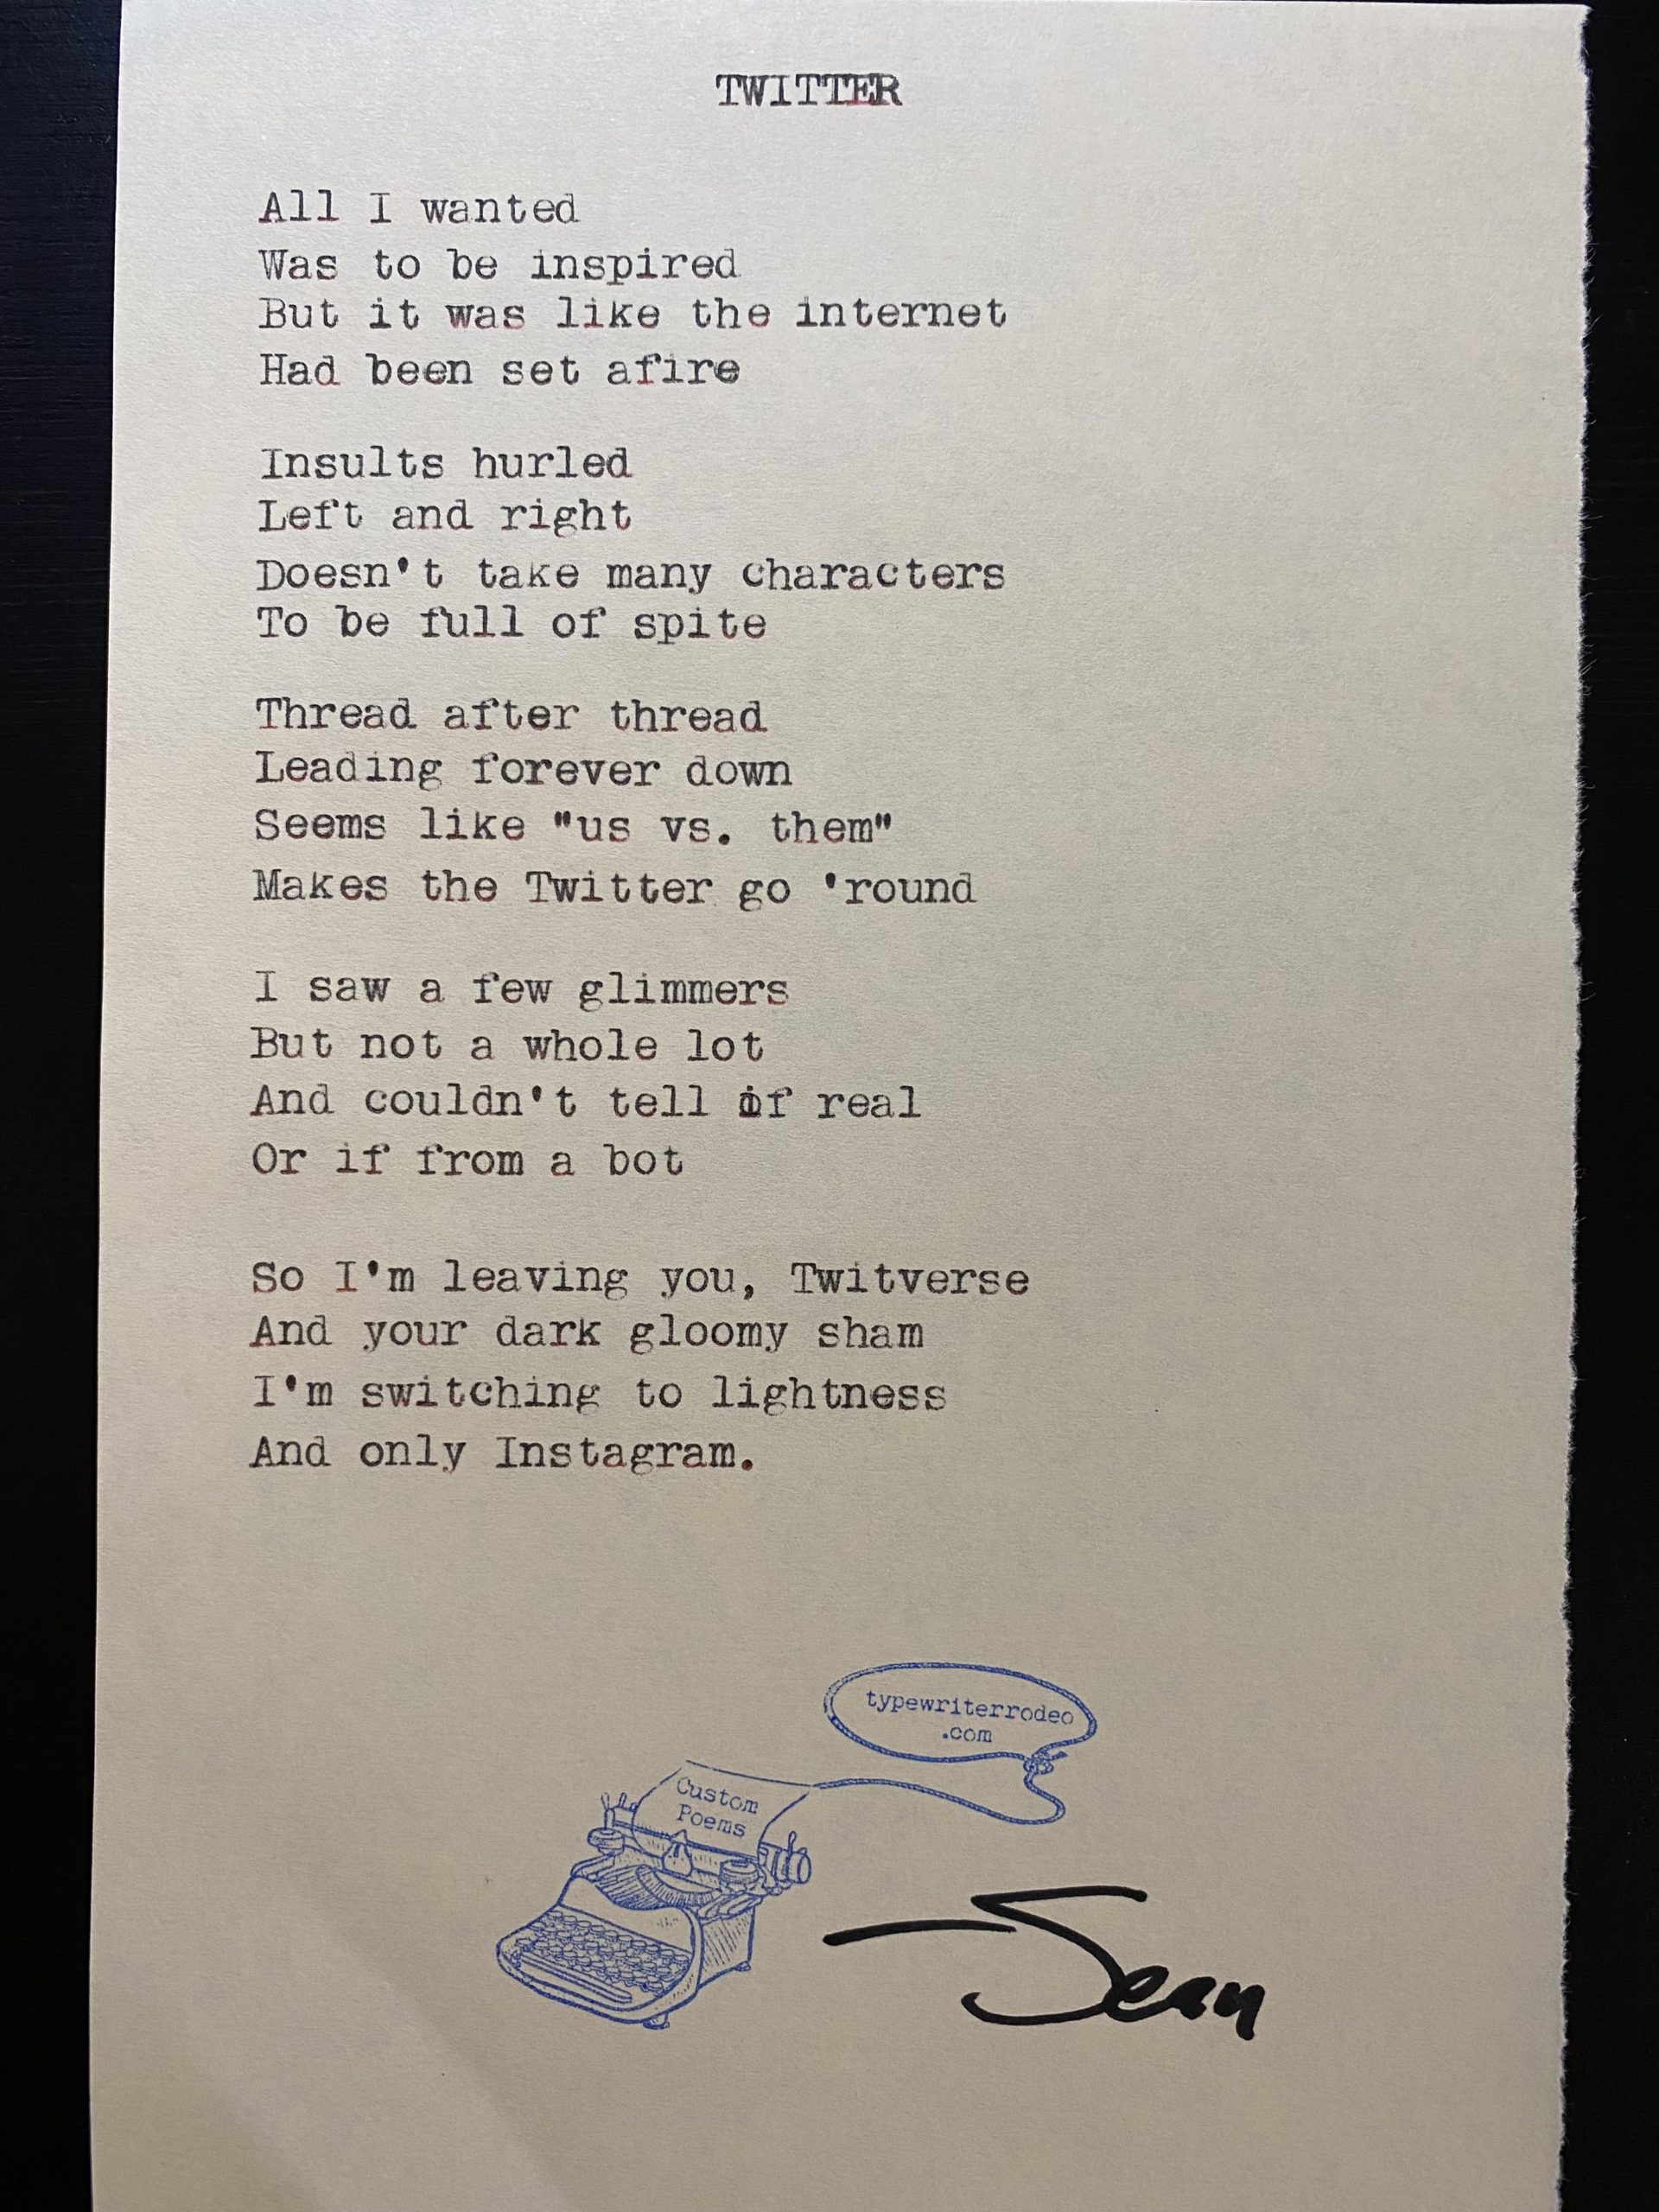 photo of the typewritten poem on a half sheet of paper